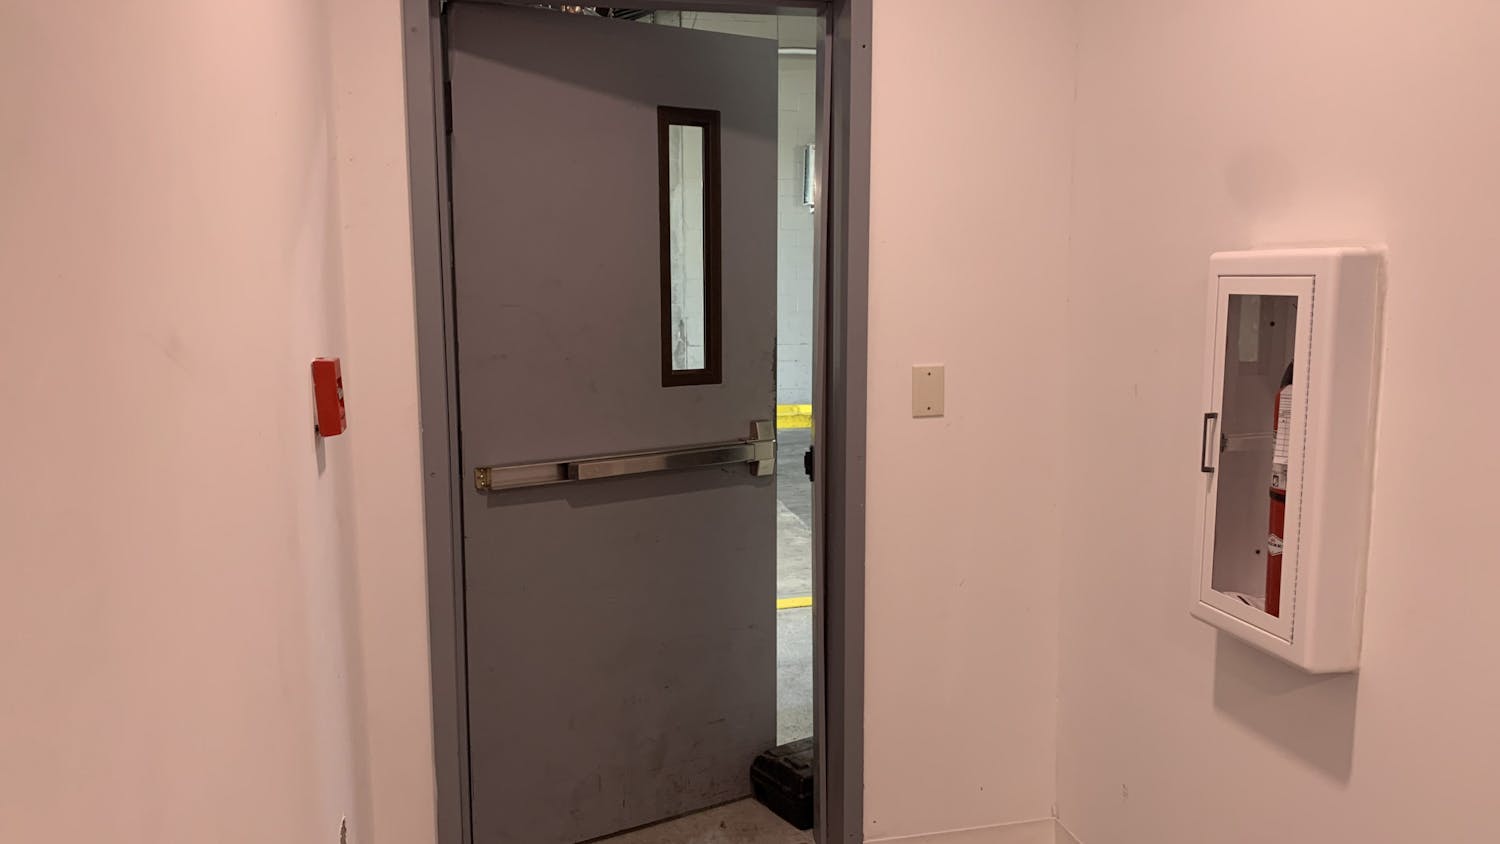 Midtown Apartment residents said propped doors, like the one pictured above July 27, 2022 contribute to the security breaches seen in the complex recently.